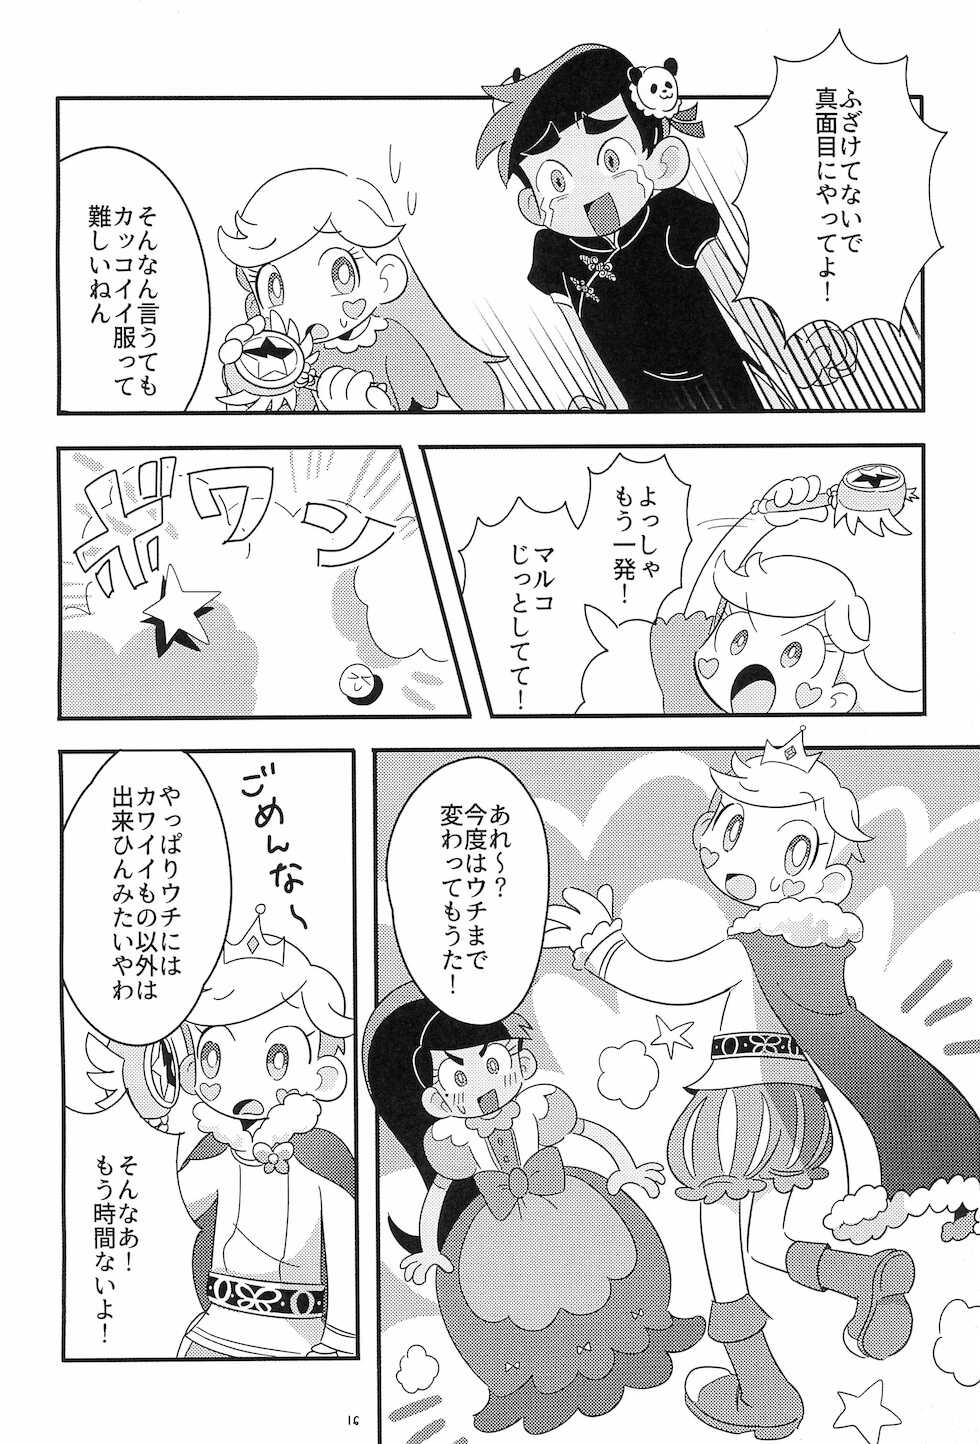 (C92) ["AAA" UDON SHOP (Moccha, Hanya)] Fashion MONSTER Party (Star vs. The Forces of Evil) - Page 20